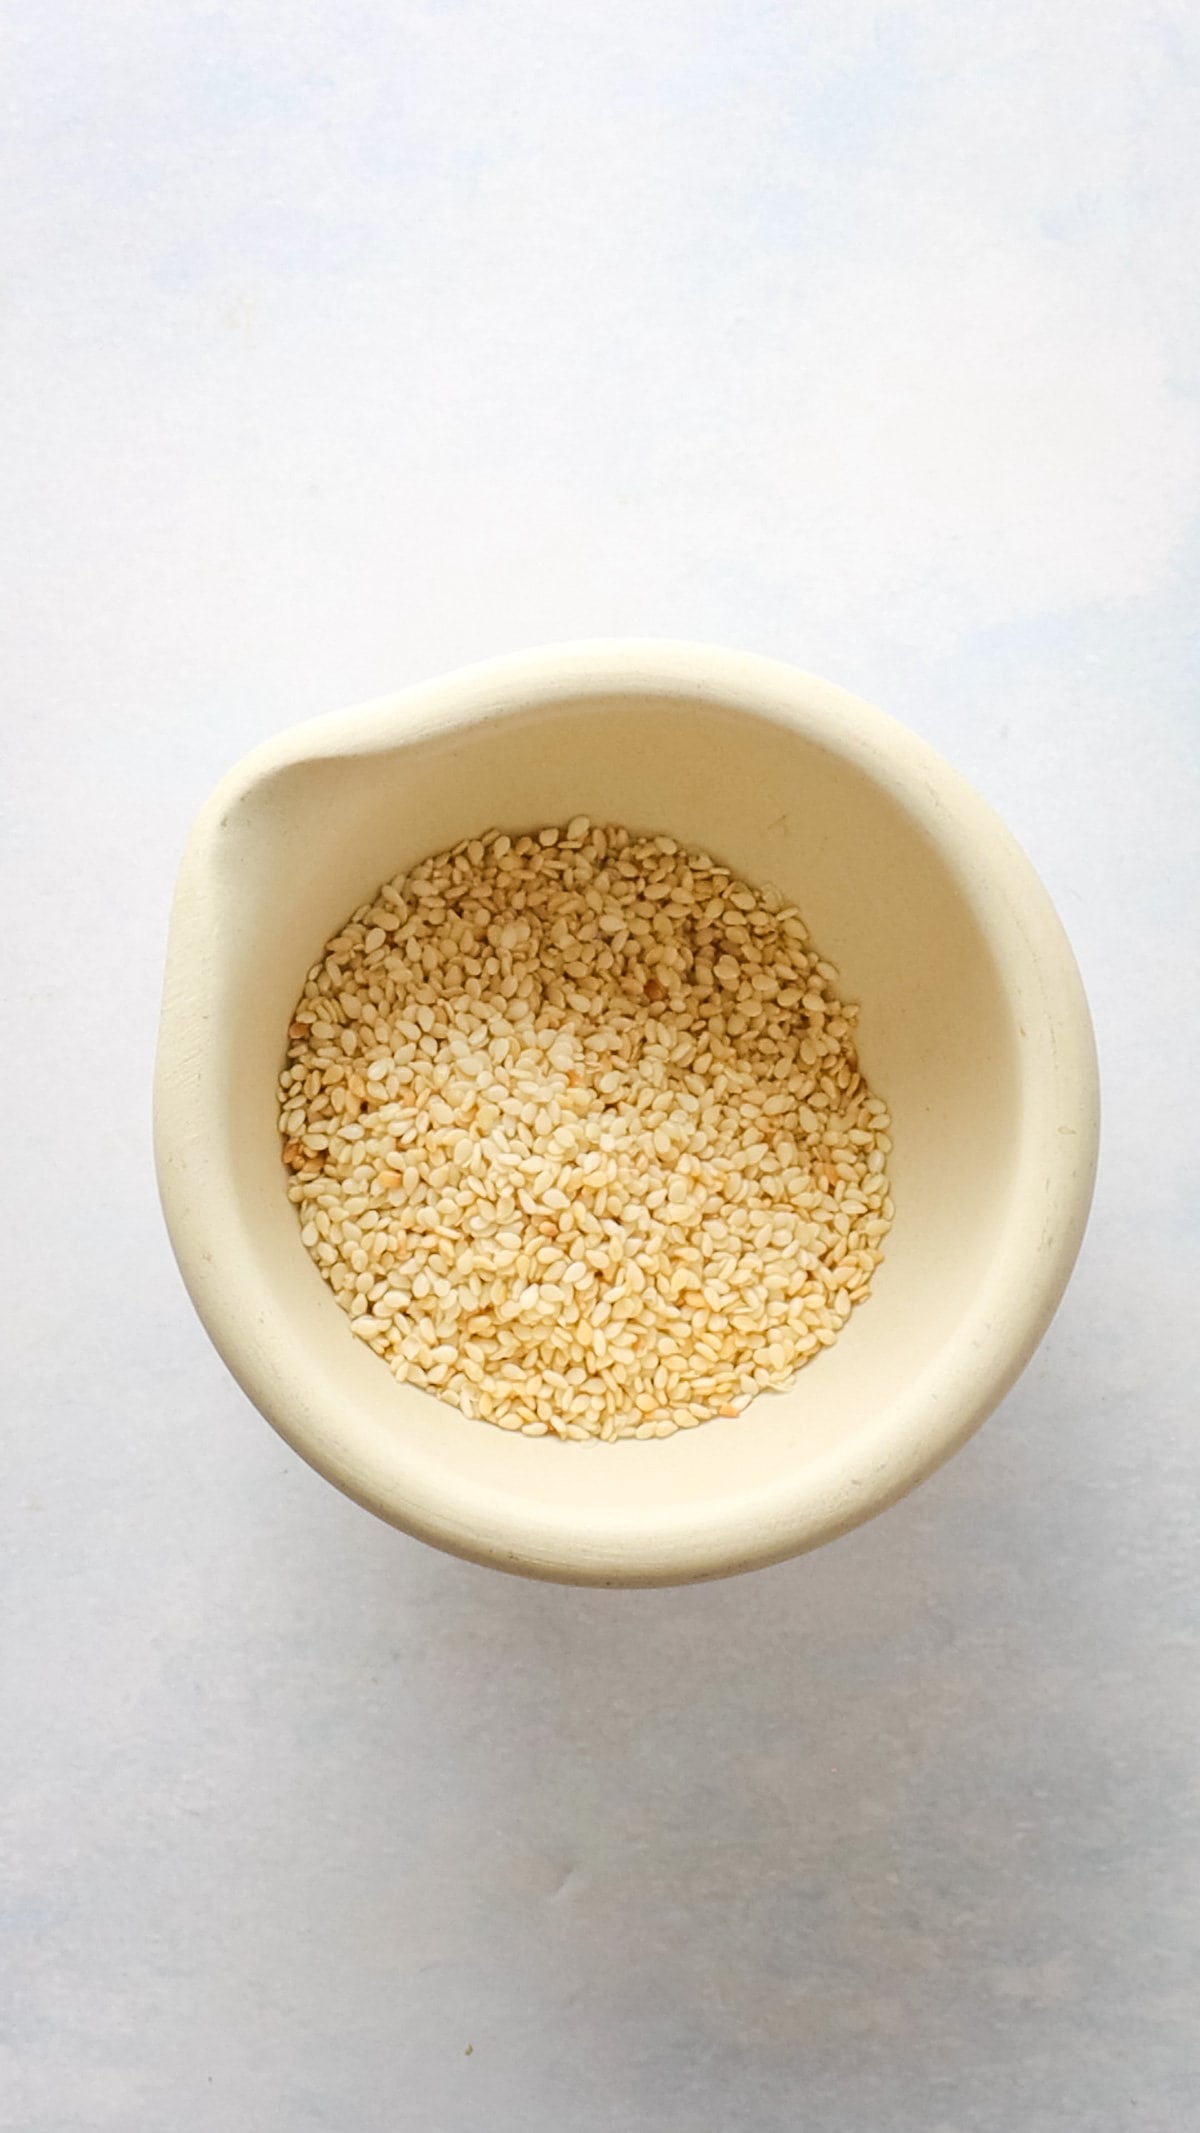 An image of toasted sesame seeds in a mortar and pestle.